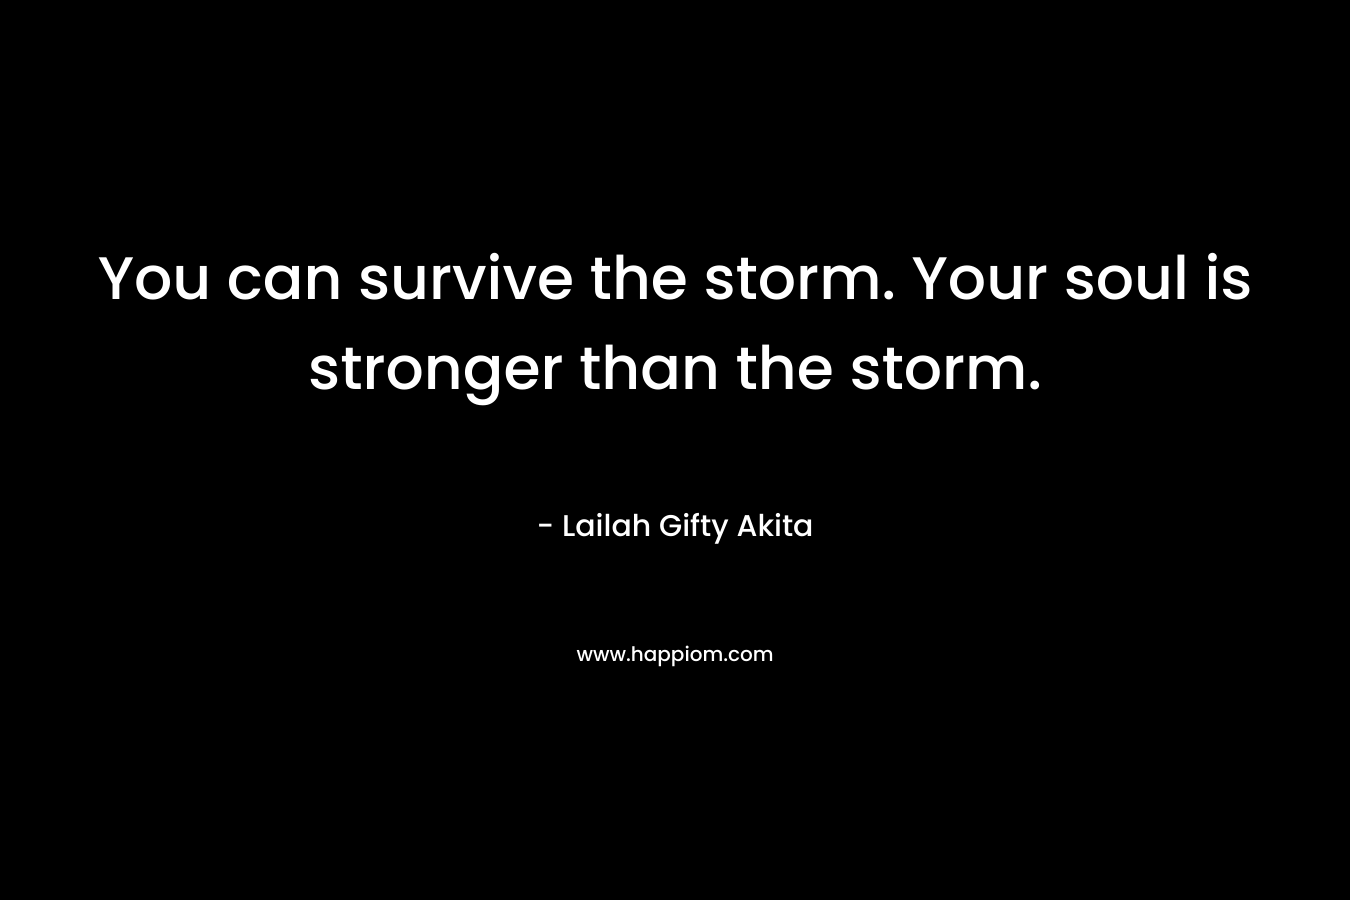 You can survive the storm. Your soul is stronger than the storm.